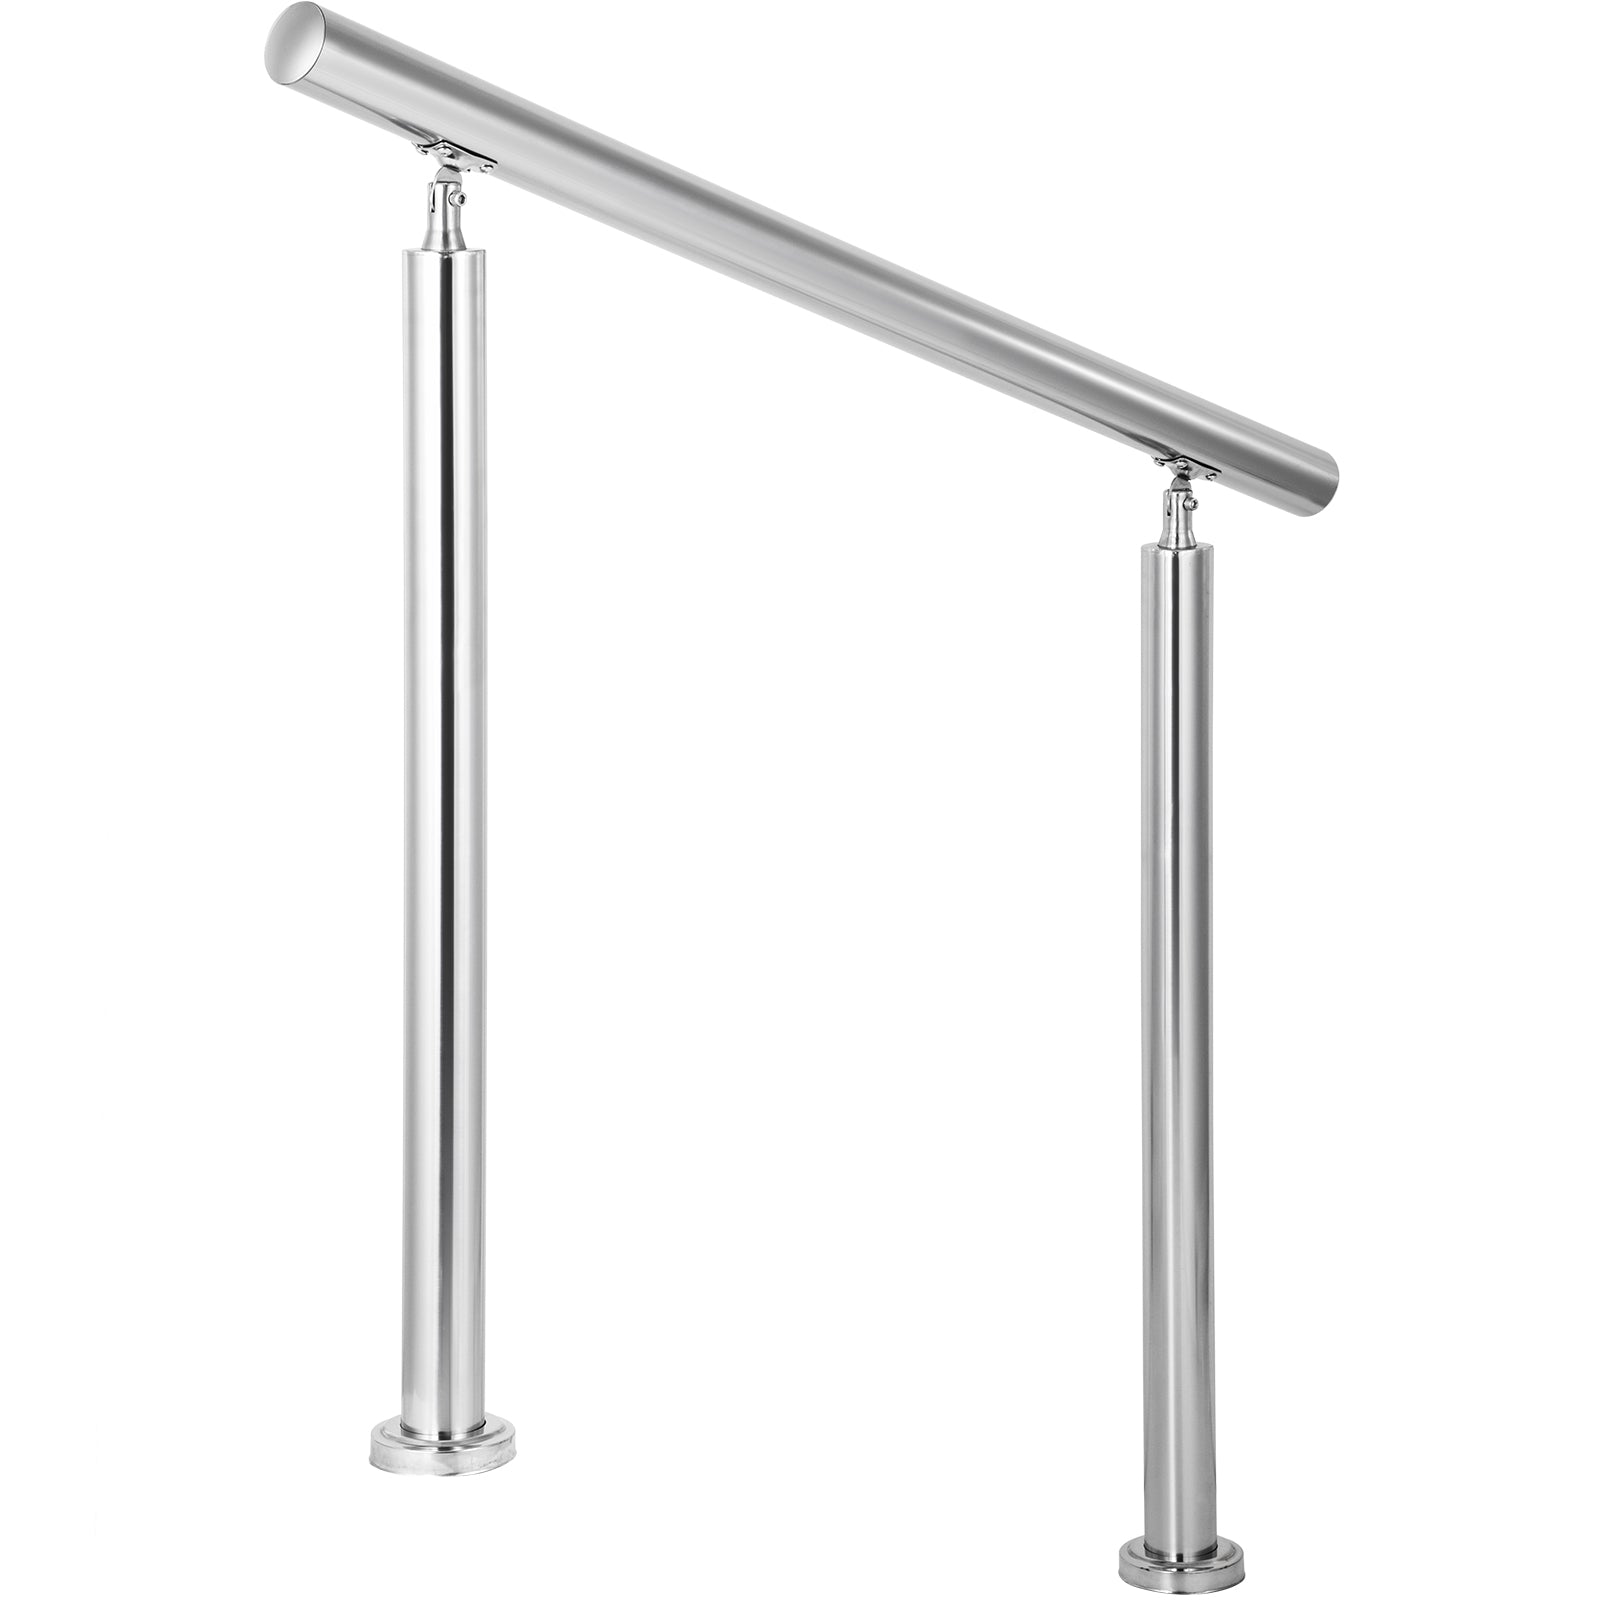 Vevor Handrail For Outdoor Steps Stainless Steel Handrail Fits 2 To 3